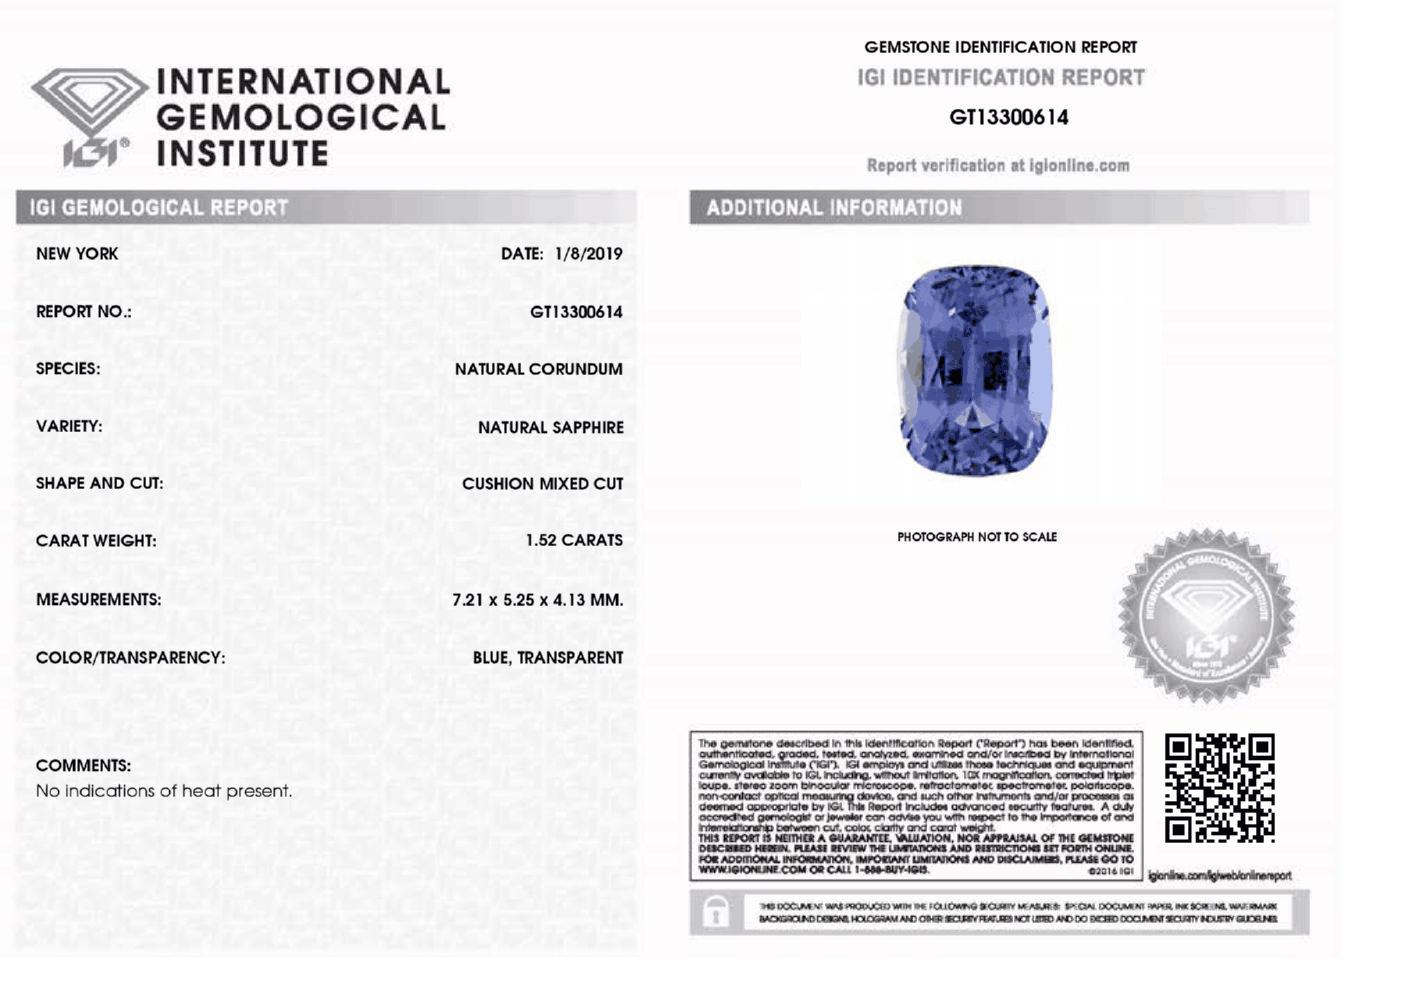 Description: 
One Loose Blue Sapphire  
Report Number: GT13300614  
Weight: 1.52 cts  
Measurements: 7.21x5.25x4.13 mm  
Shape: Cushion Mixed Cut  
Cutting Style Crown: Modified Brilliant Cut  
Cutting Style Pavilion: Step Cut   
Transparency: